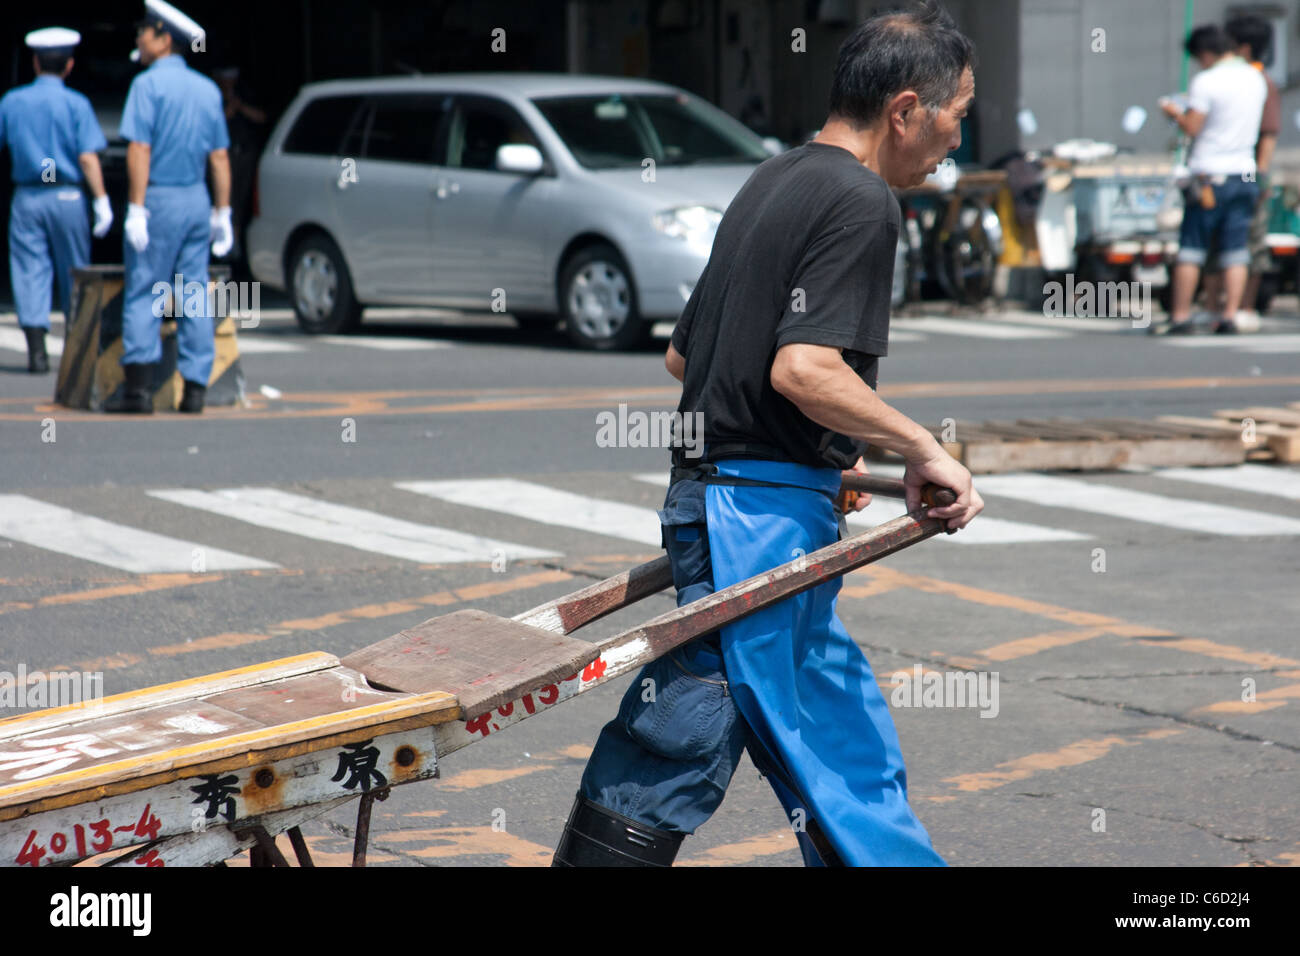 Tsukiji market worker pulling a car in the parking lot Stock Photo